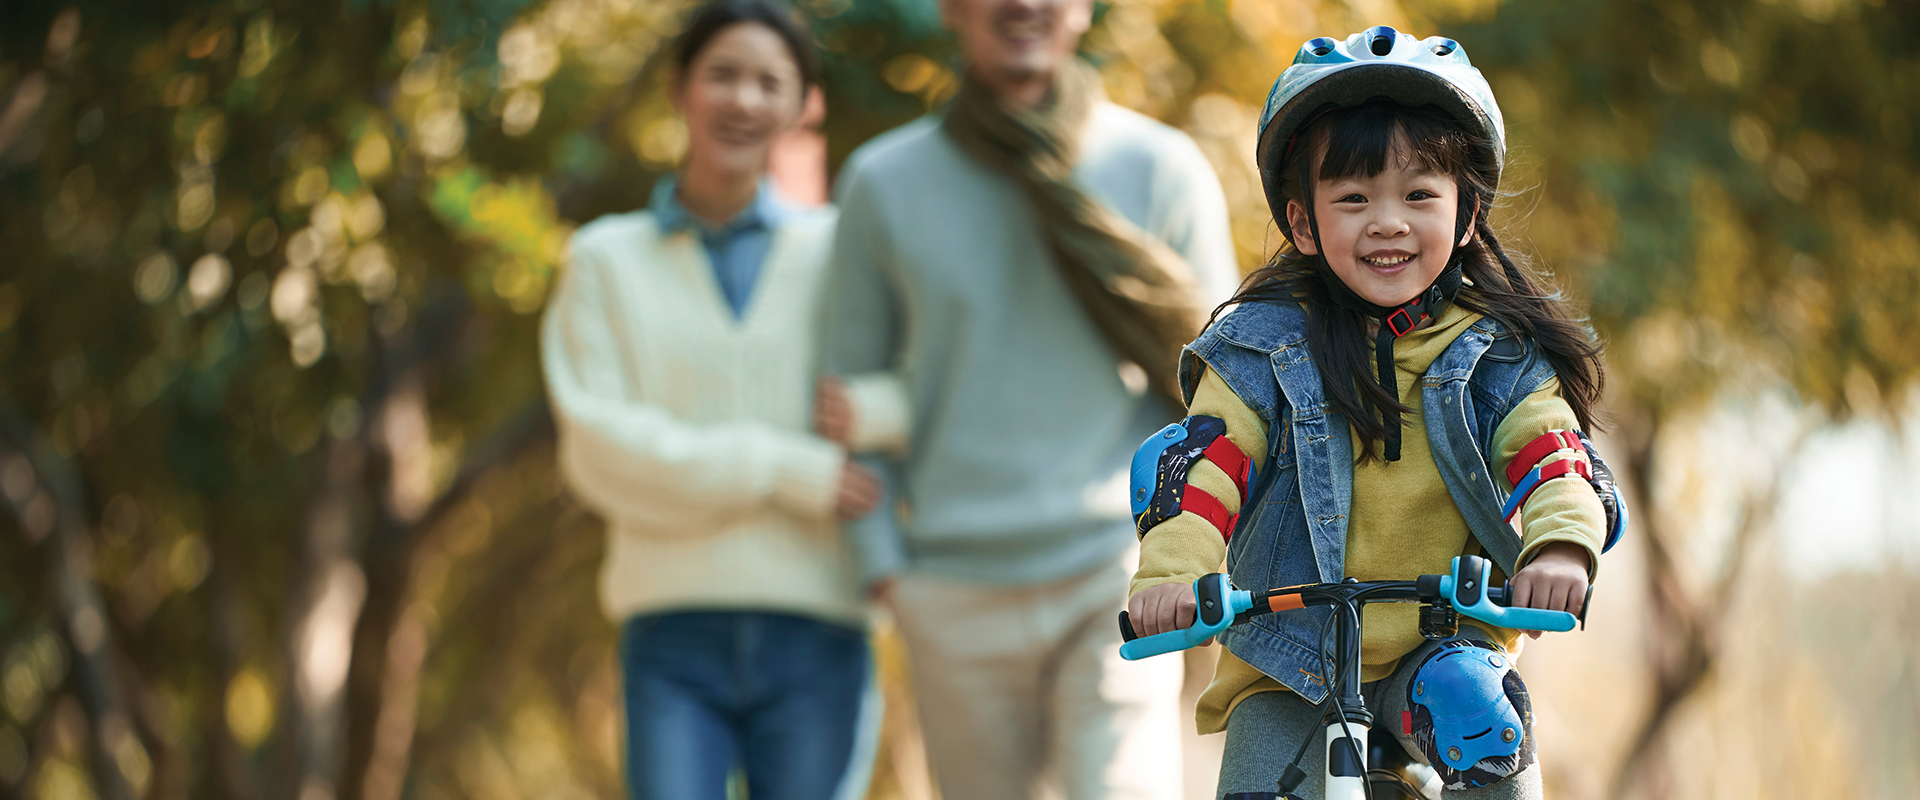 A girl riding a bike with her family walking in the background